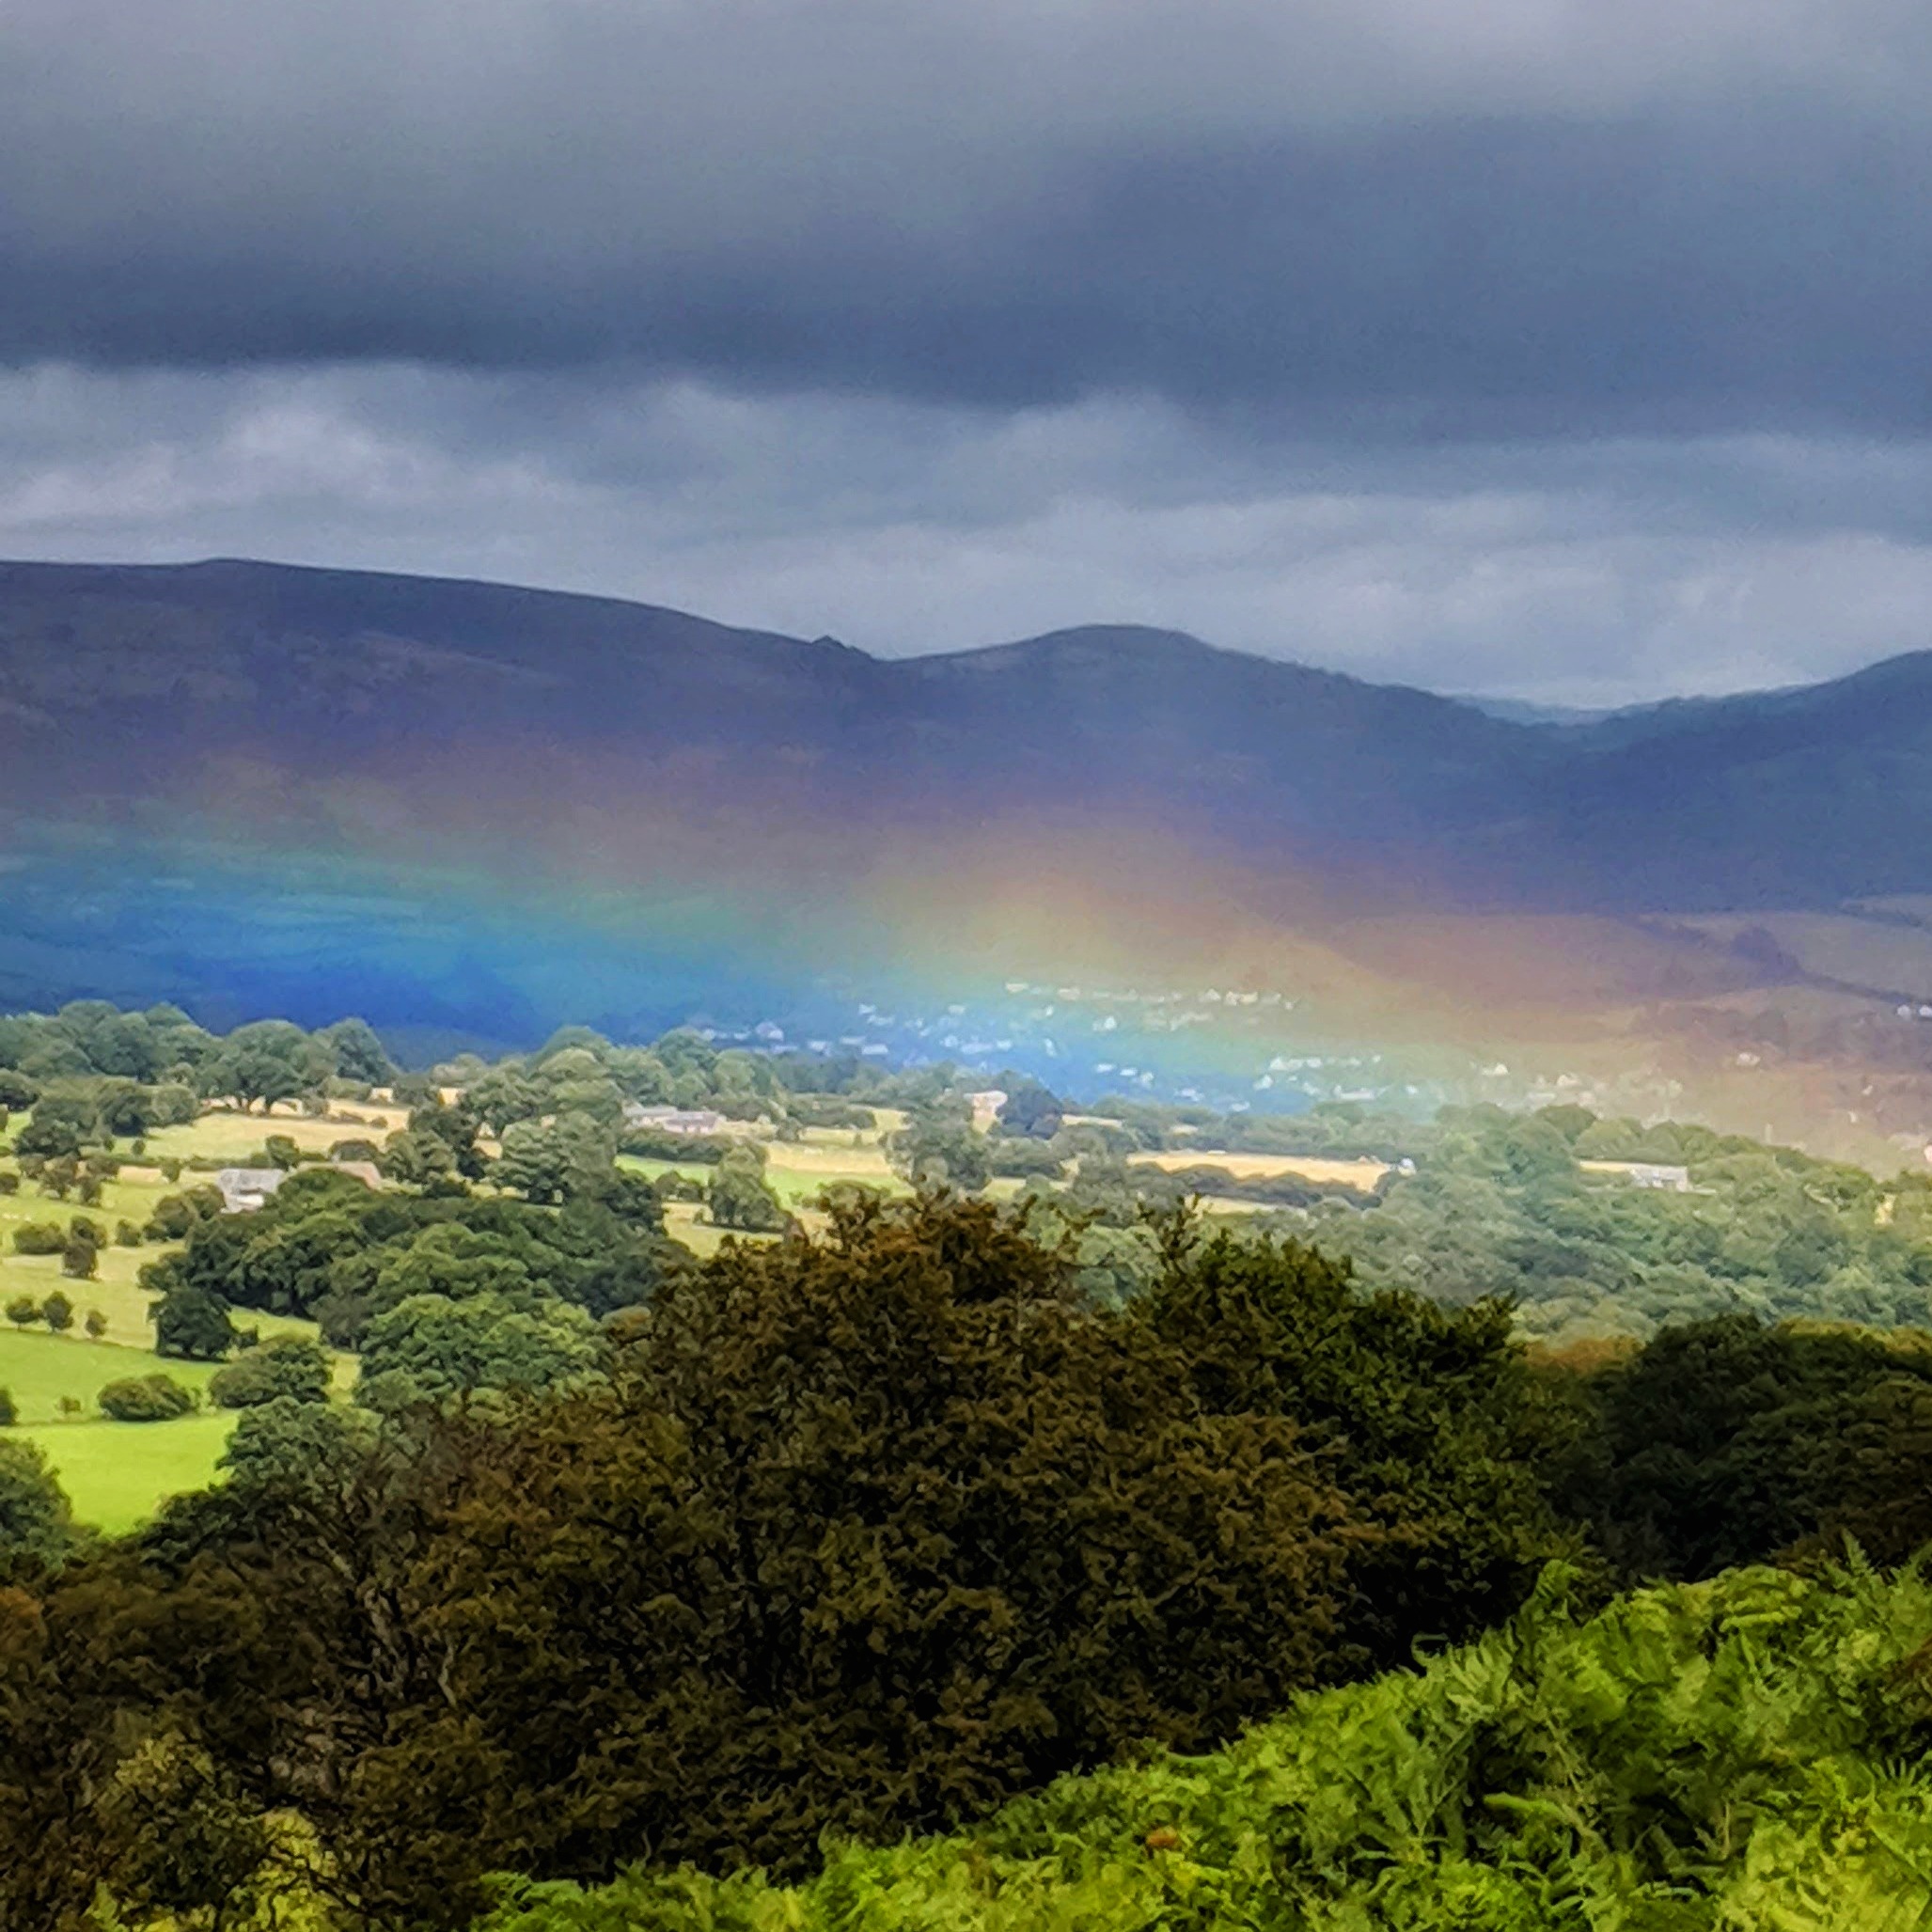 Rainbow in the South Wales valleys